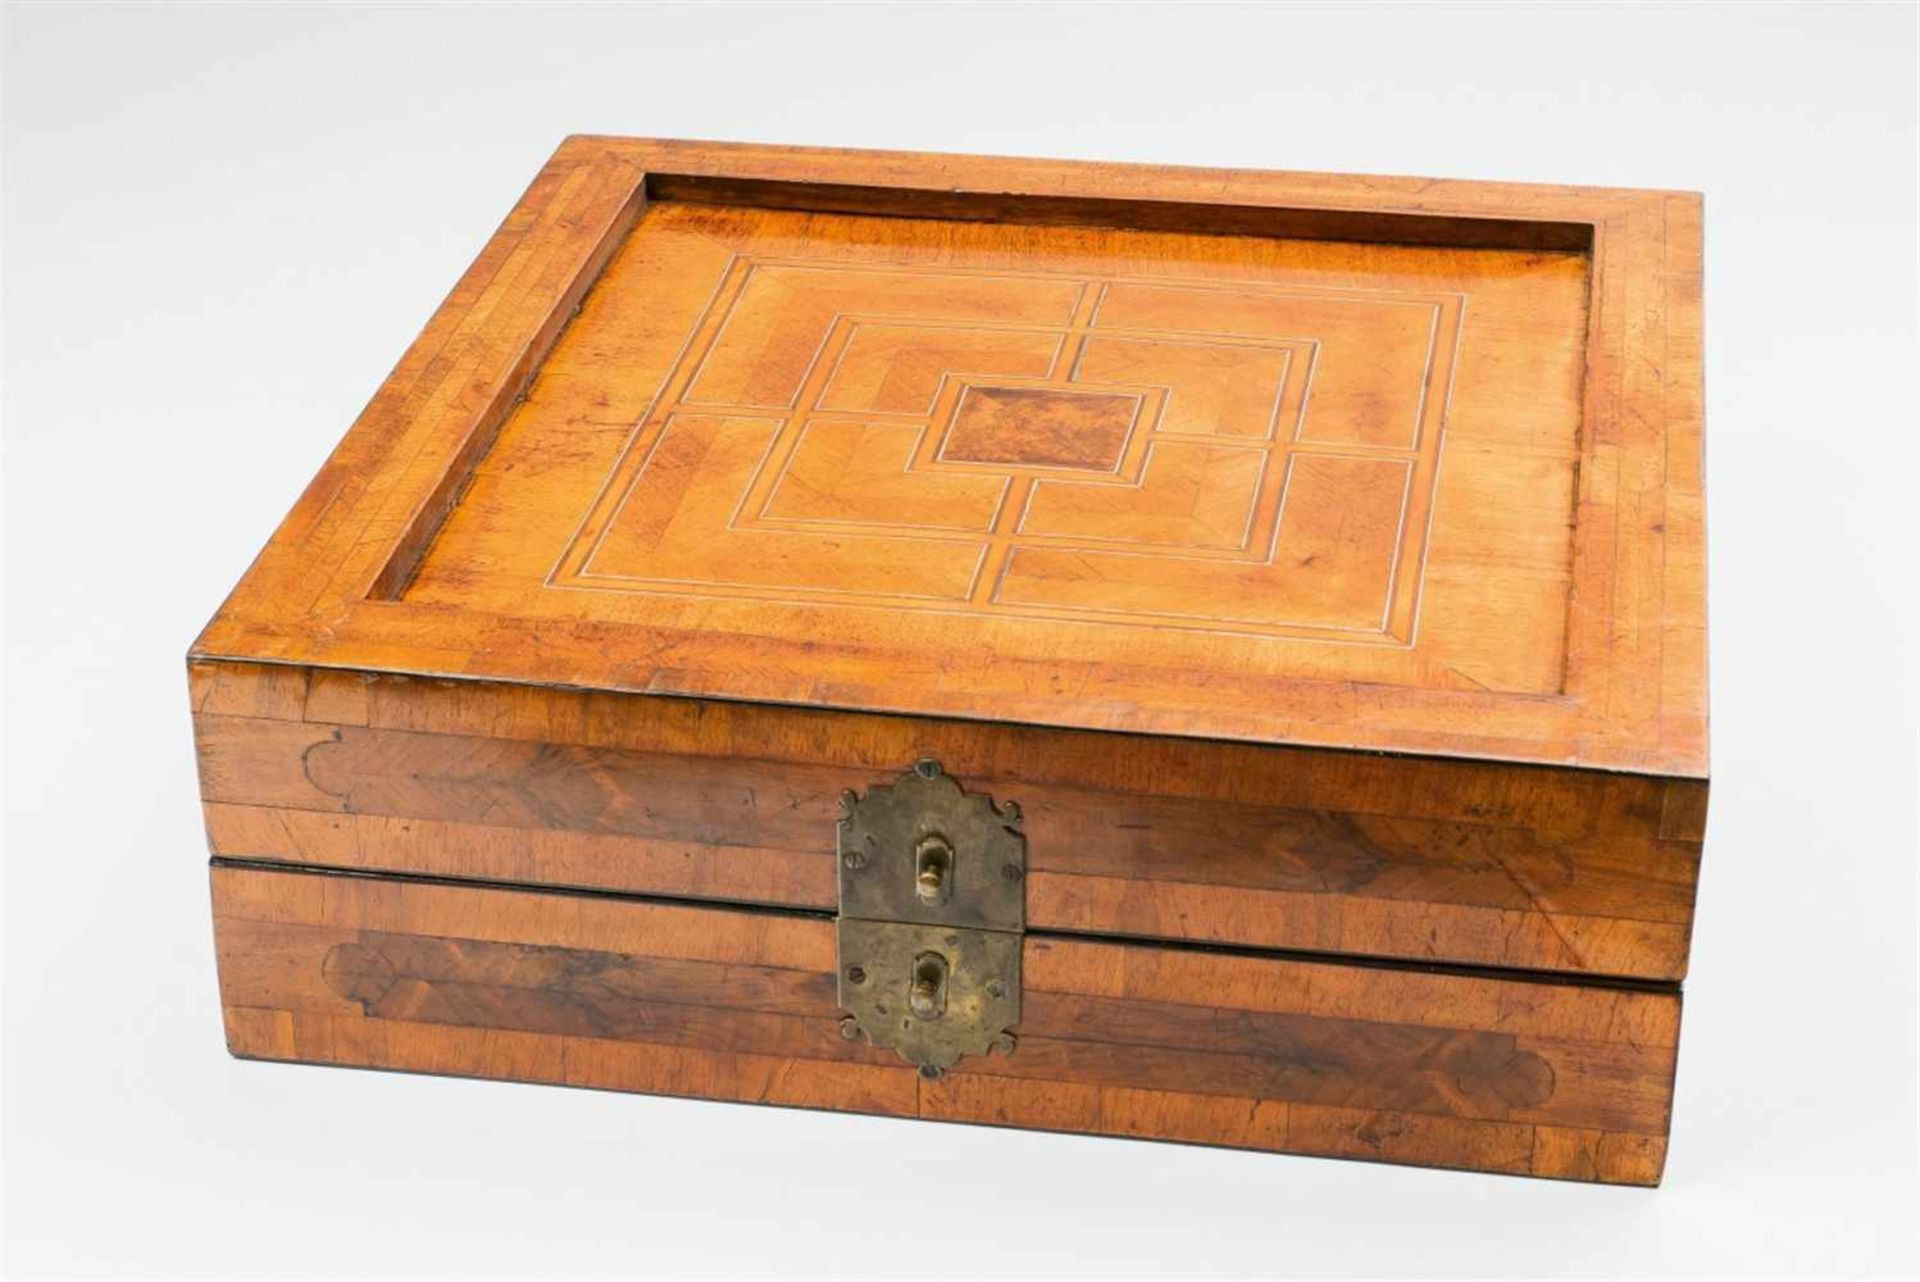 A large German Baroque gaming boxSquare travel gaming box with walnut, ebony, and aramanth